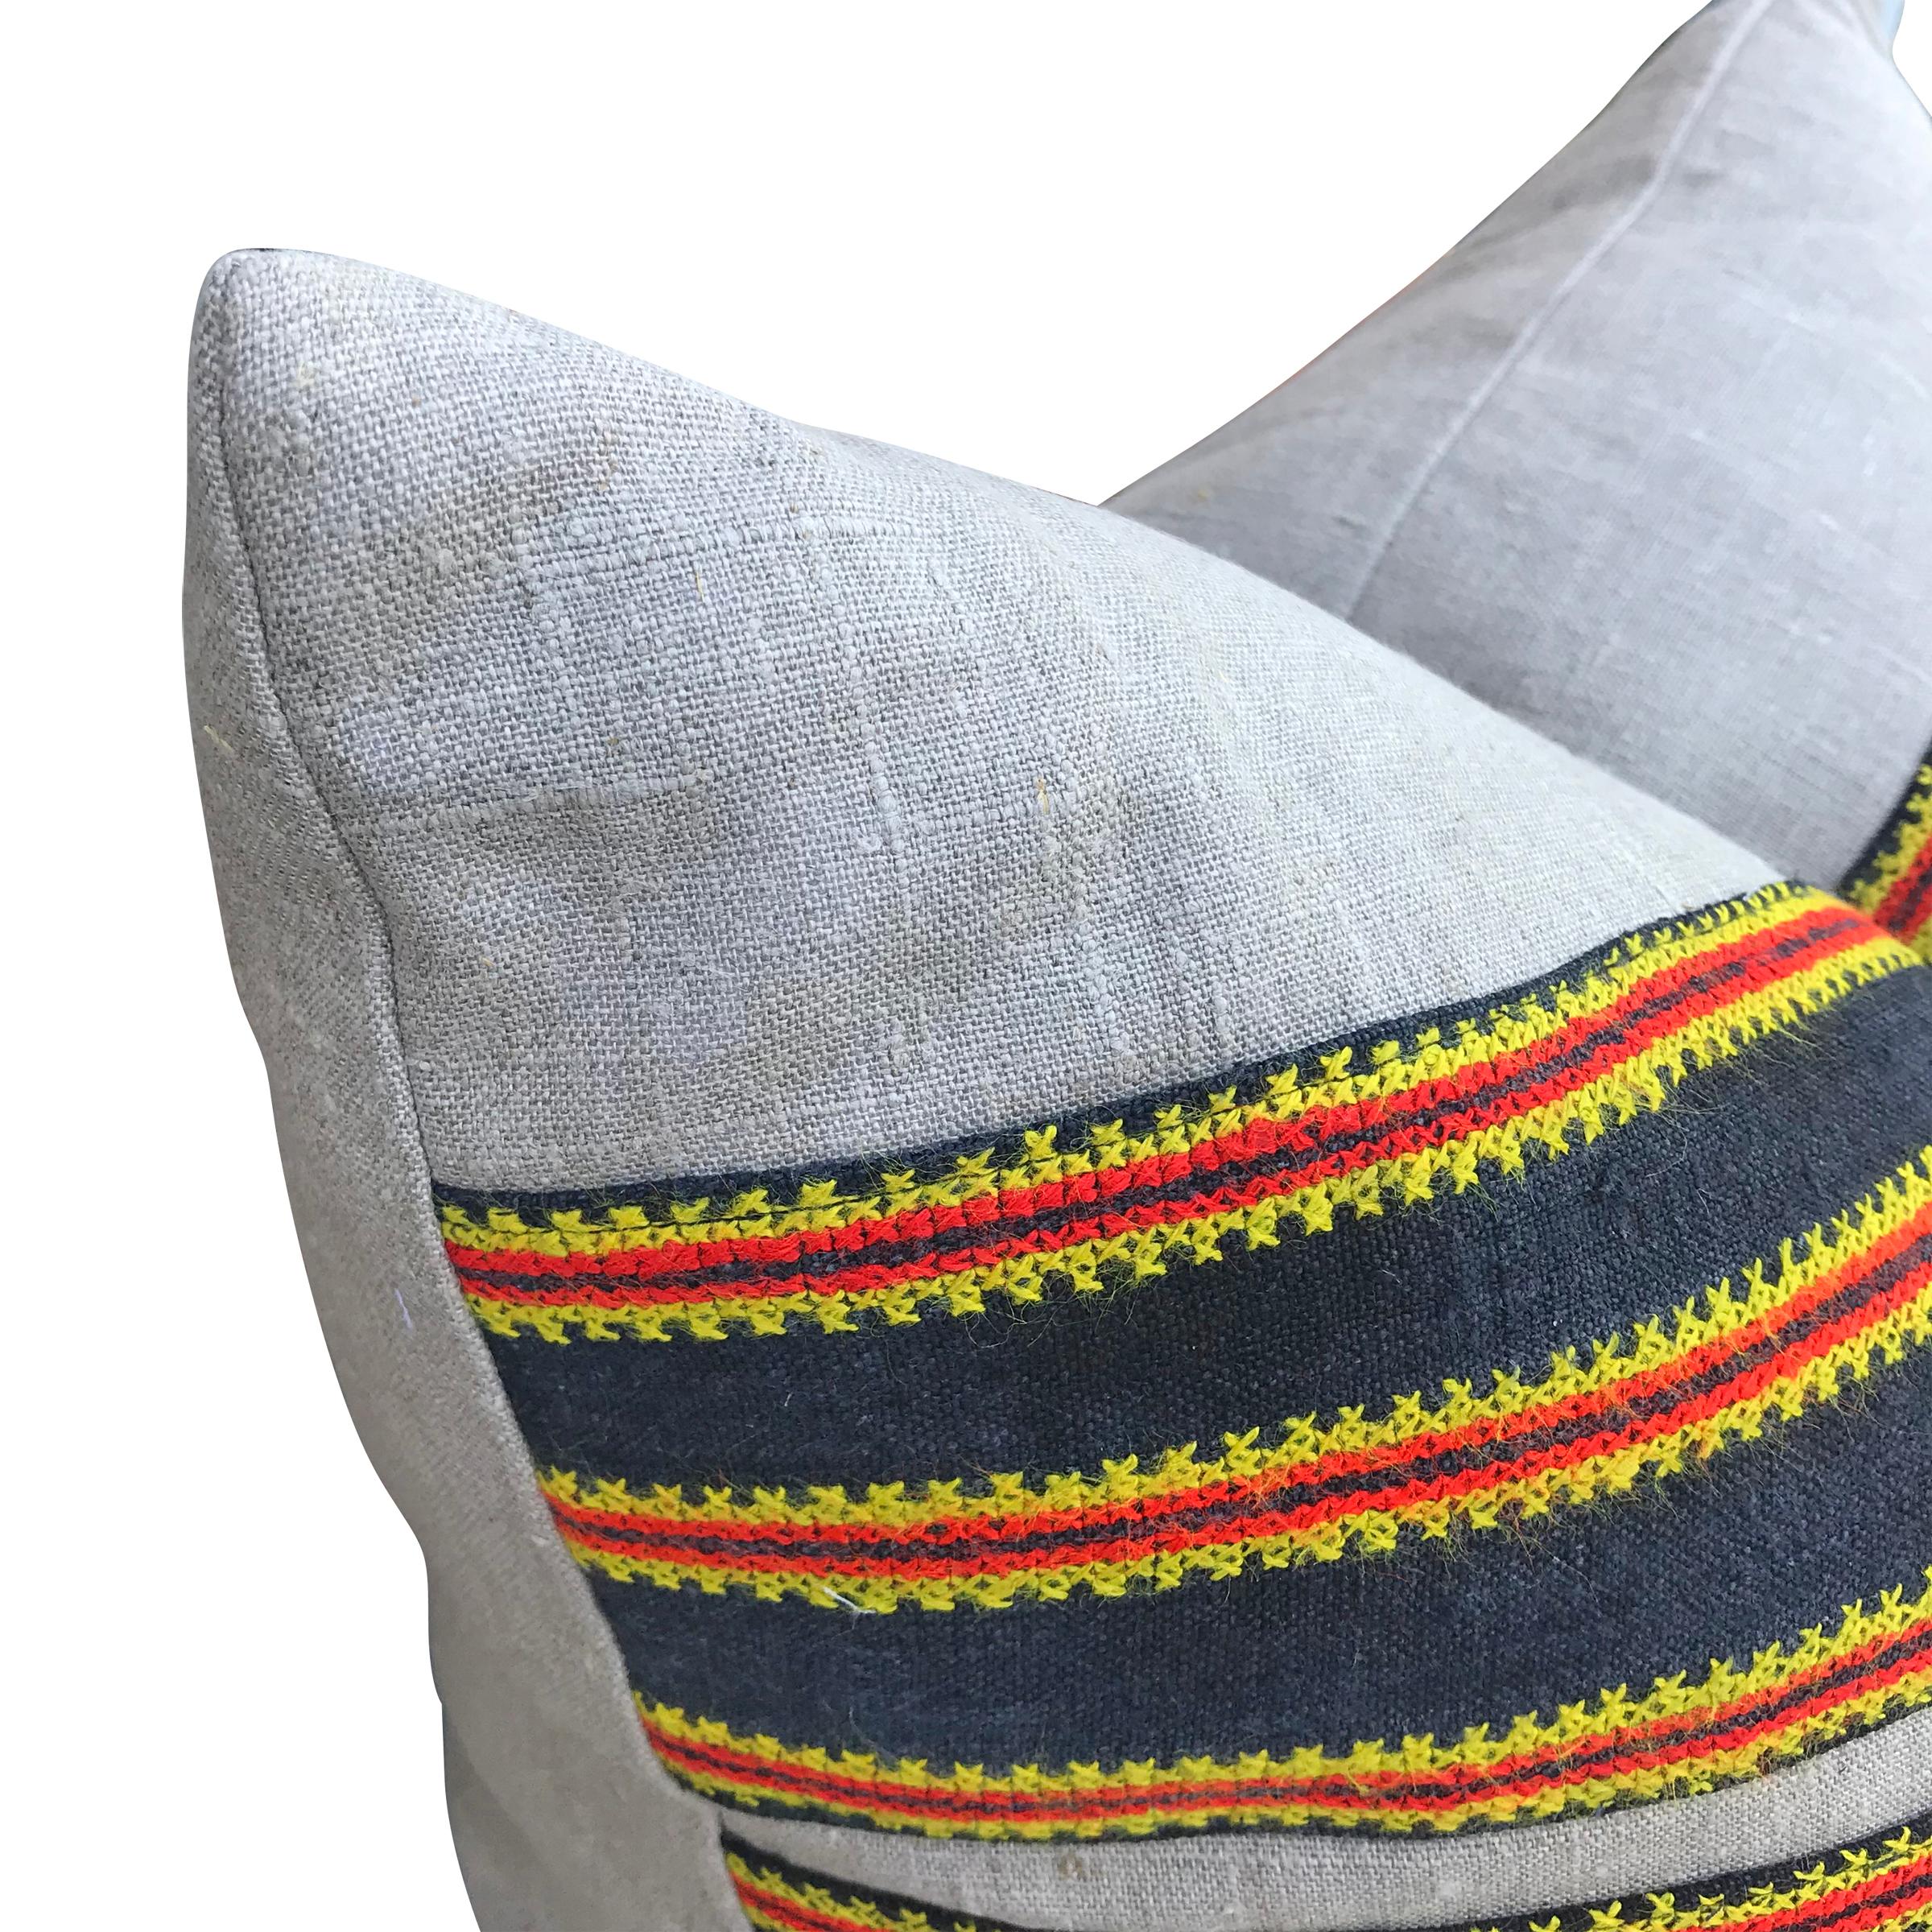 Chinese Pair of Vintage Hmong Embroidery Pillows